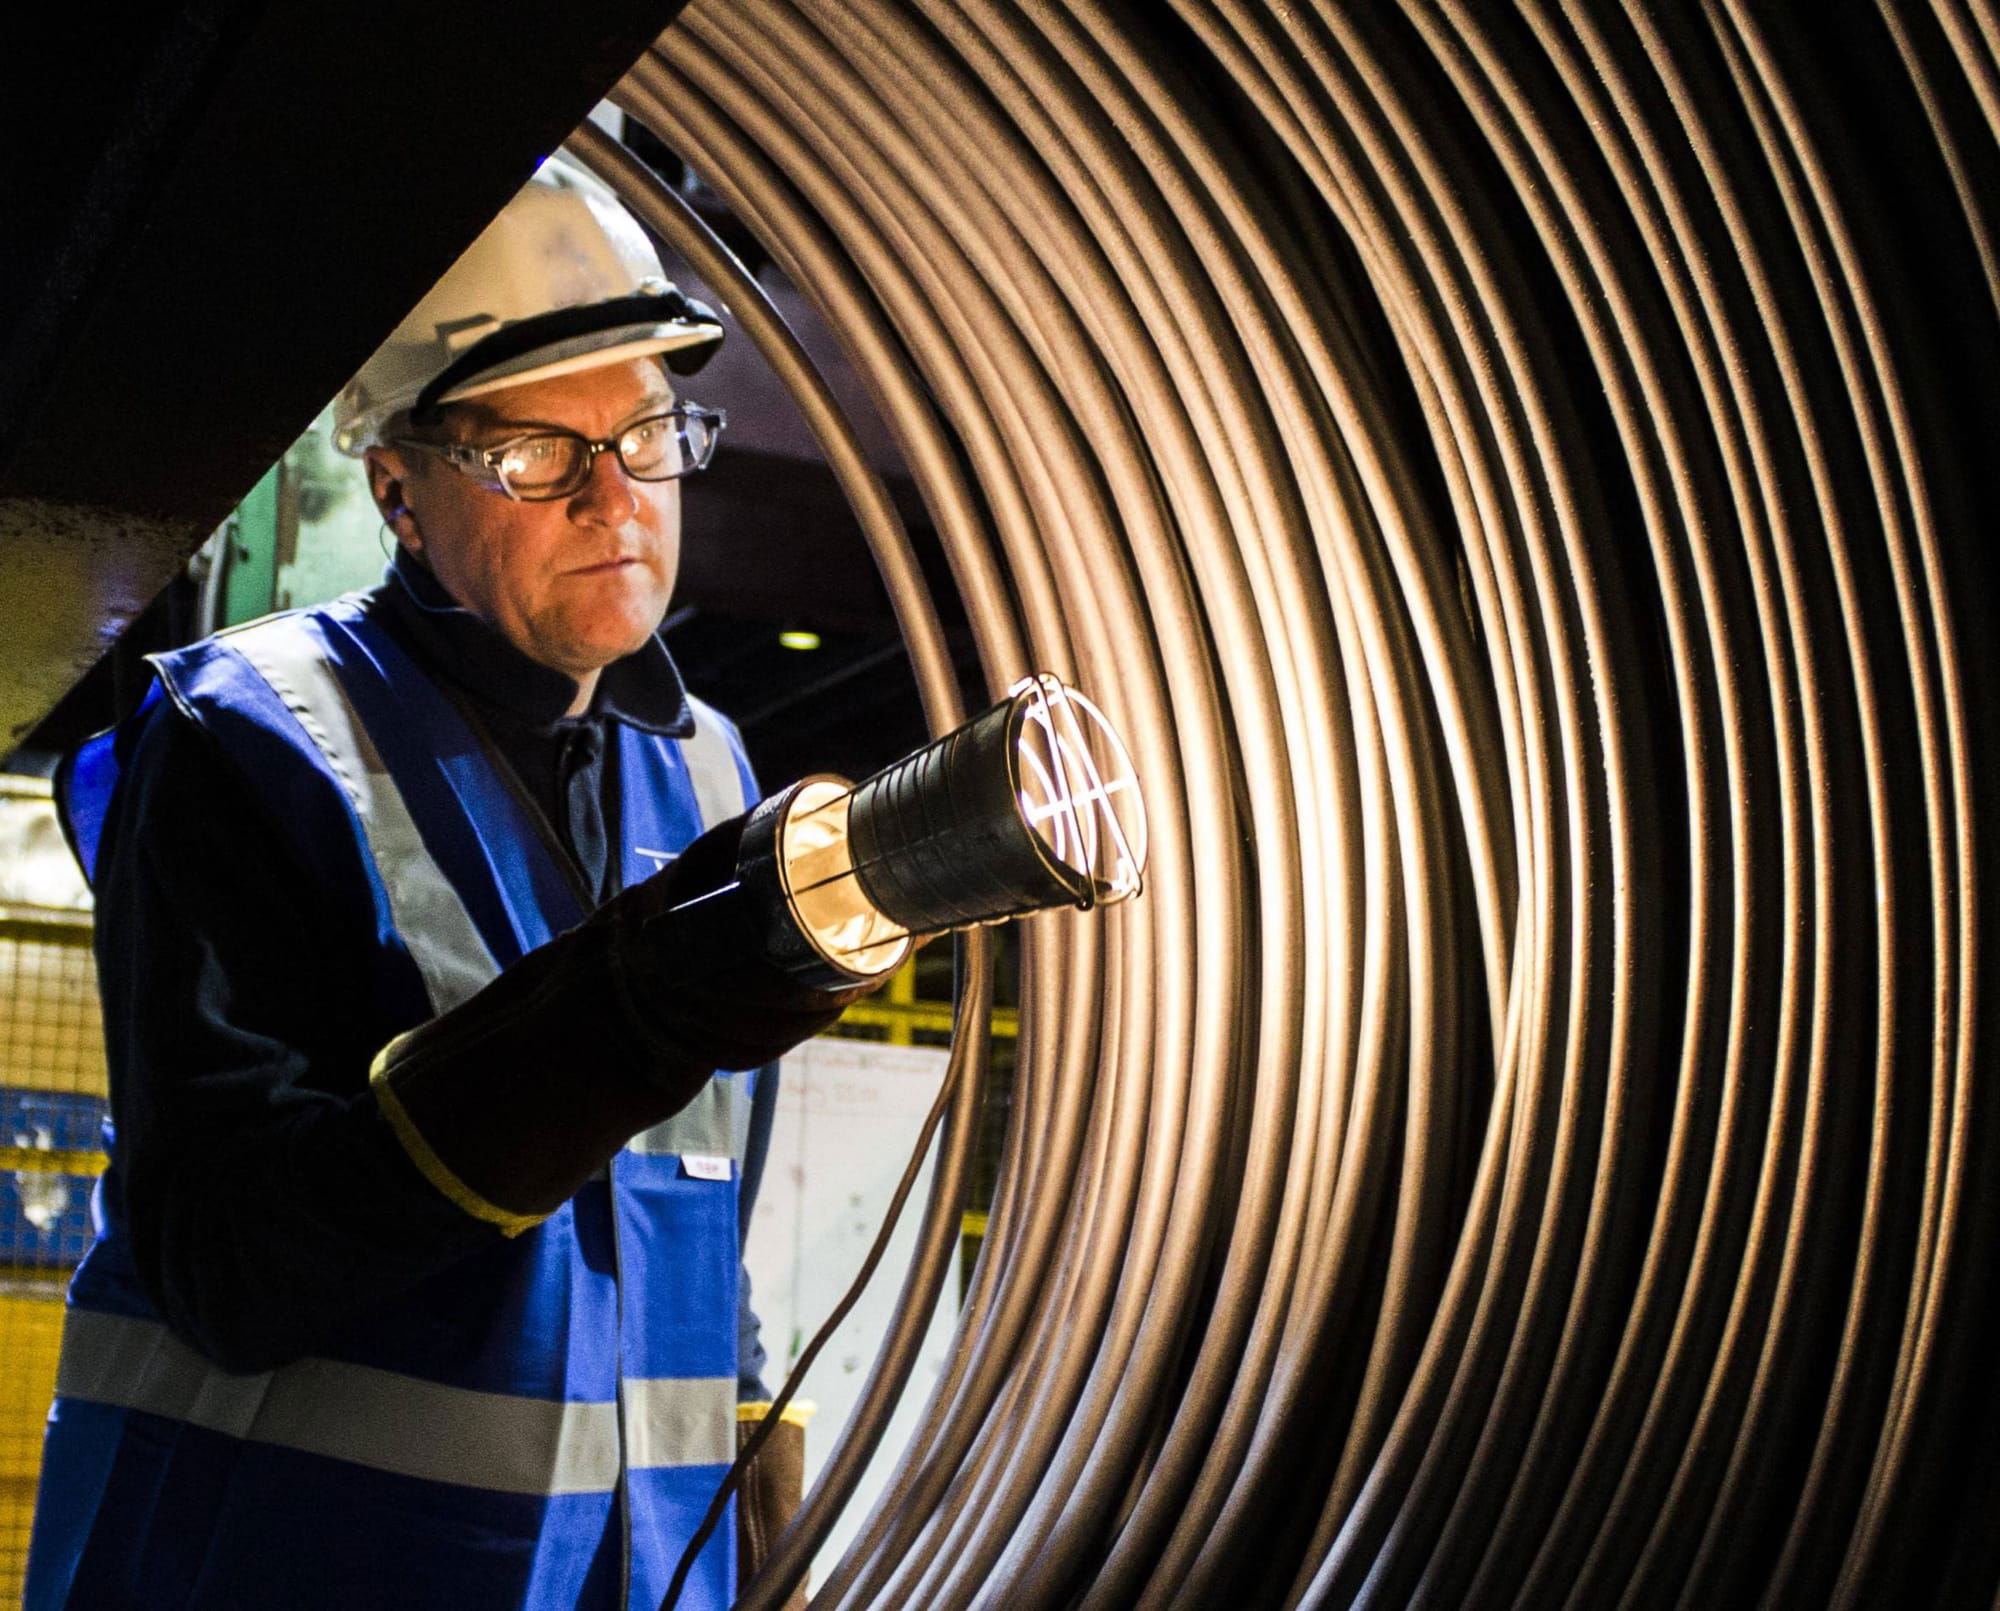 UK Steel: Without robust Carbon Border, steel industry will be at risk